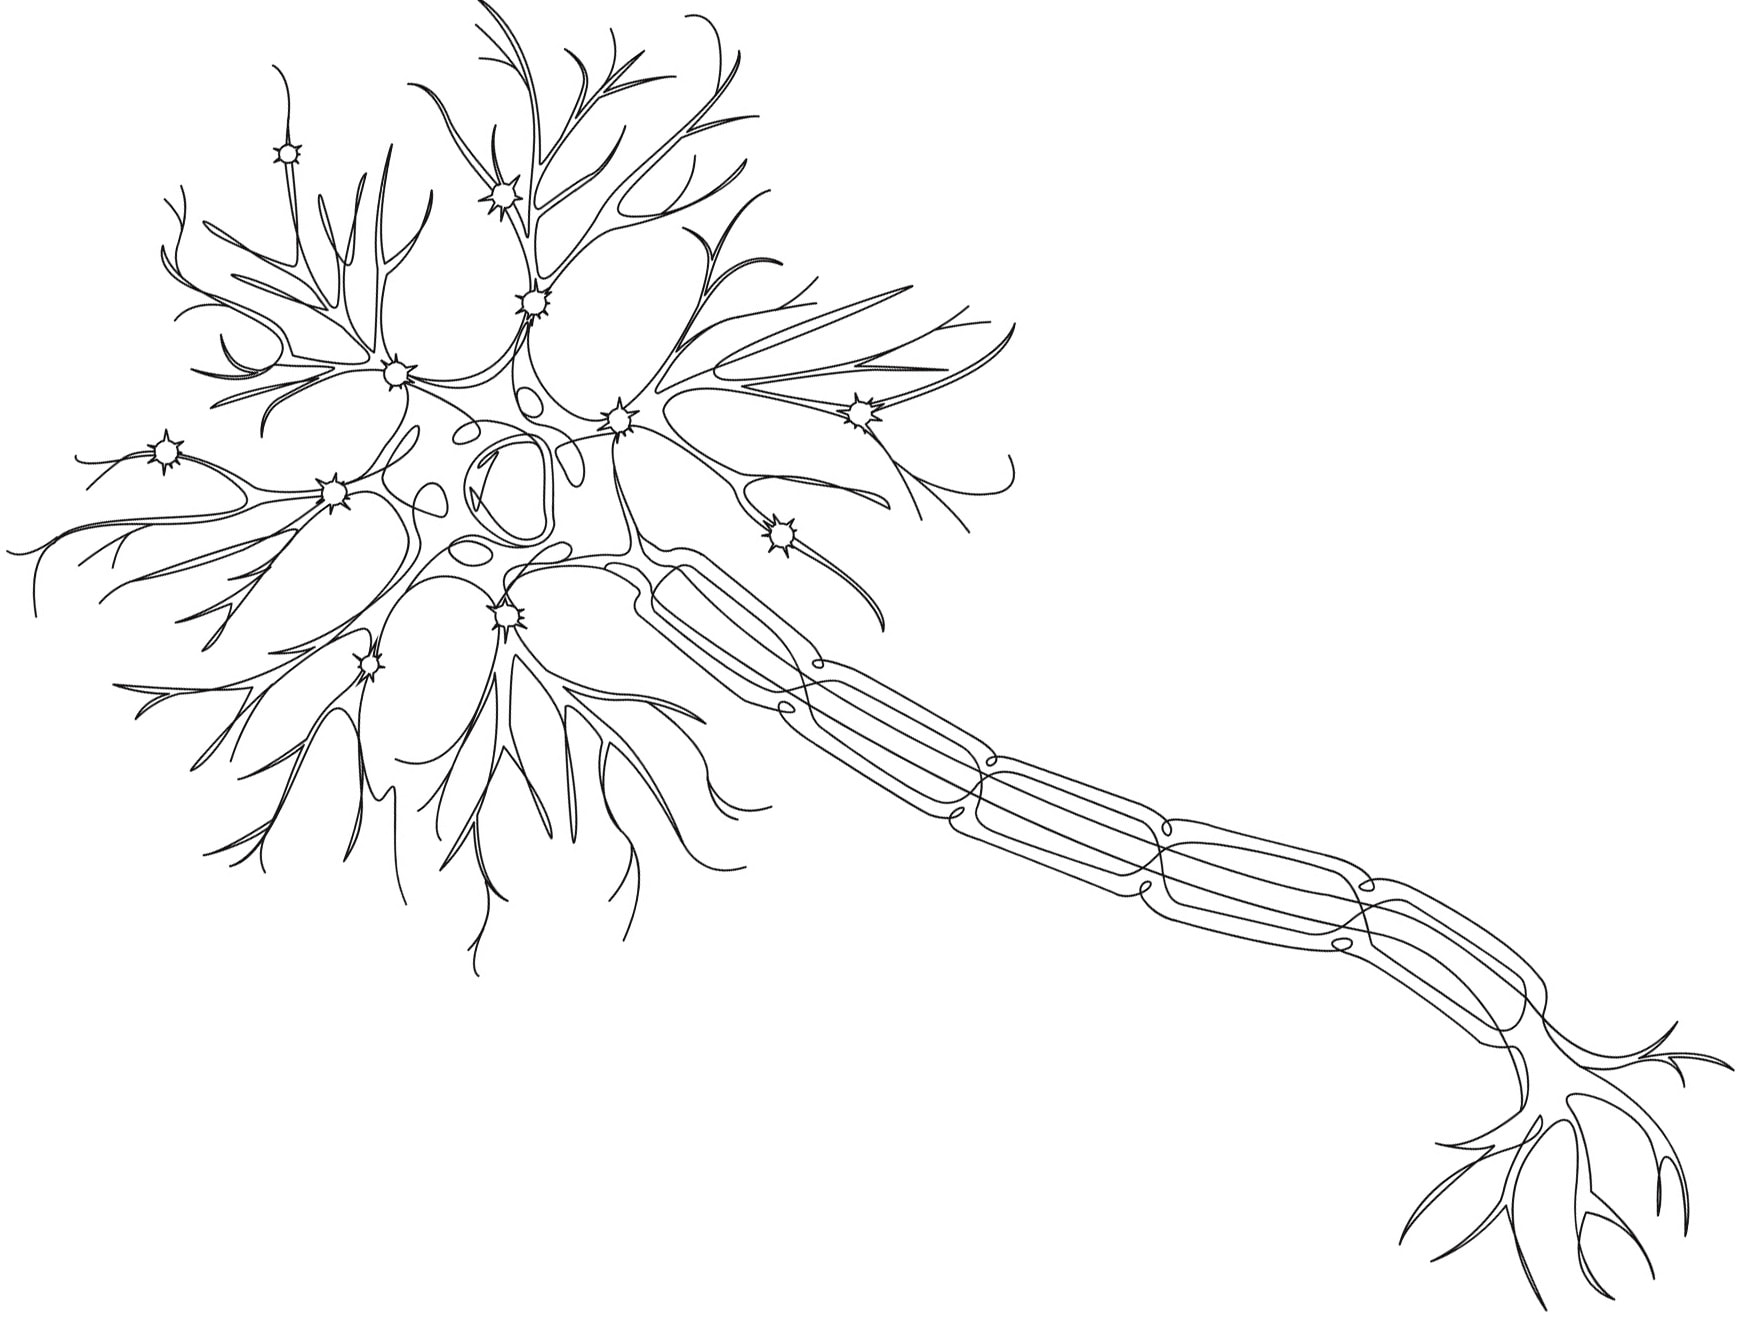 A drawing of a neuron